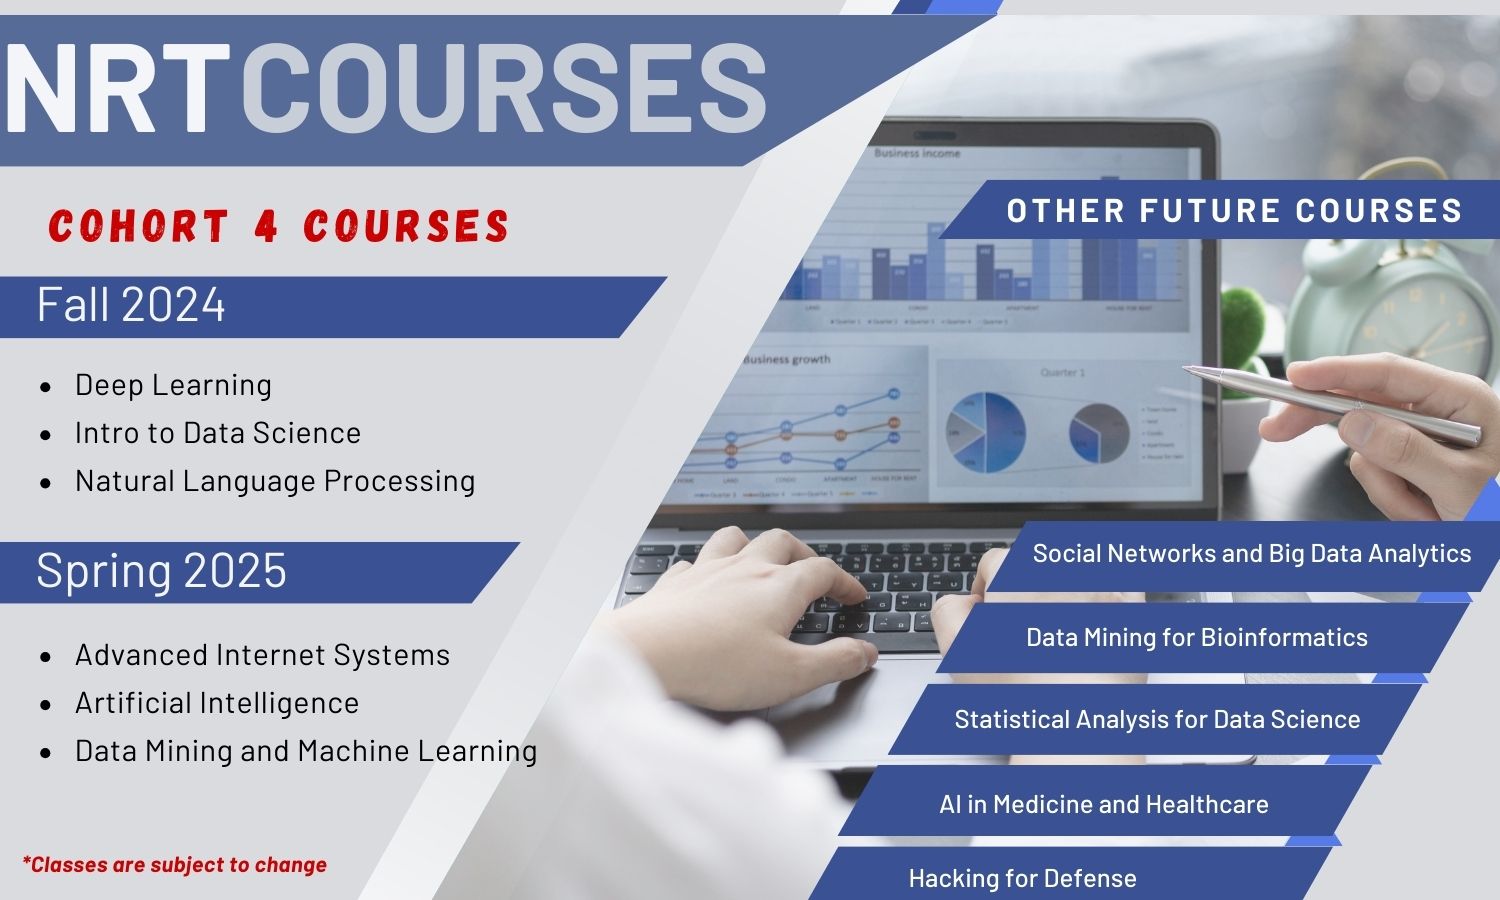 nrt courses fall 2024 and spring 2025